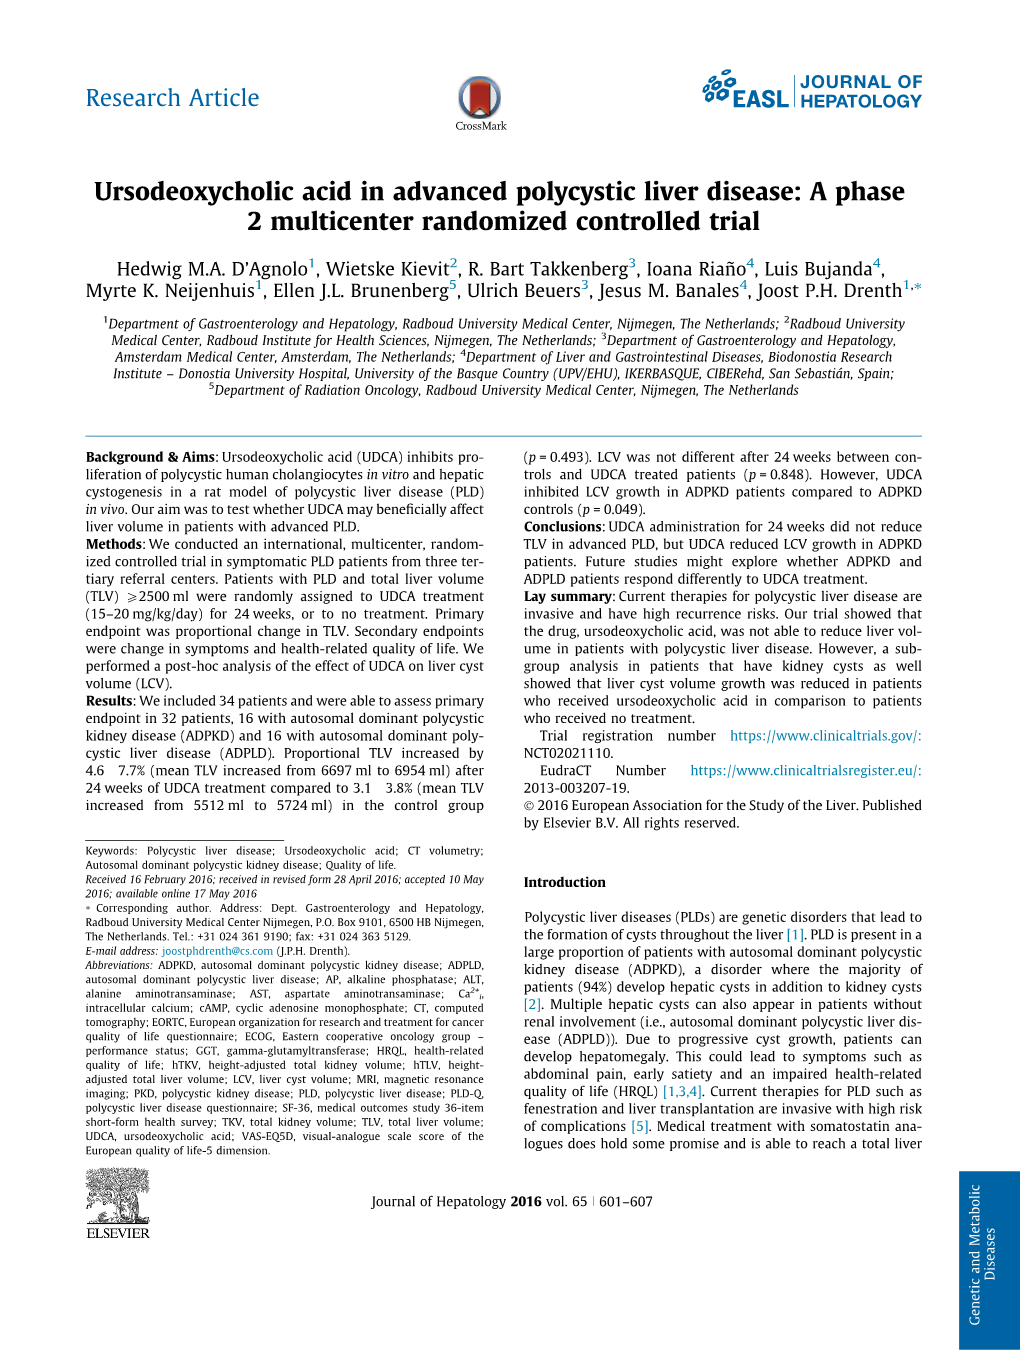 Ursodeoxycholic Acid in Advanced Polycystic Liver Disease: a Phase 2 Multicenter Randomized Controlled Trial